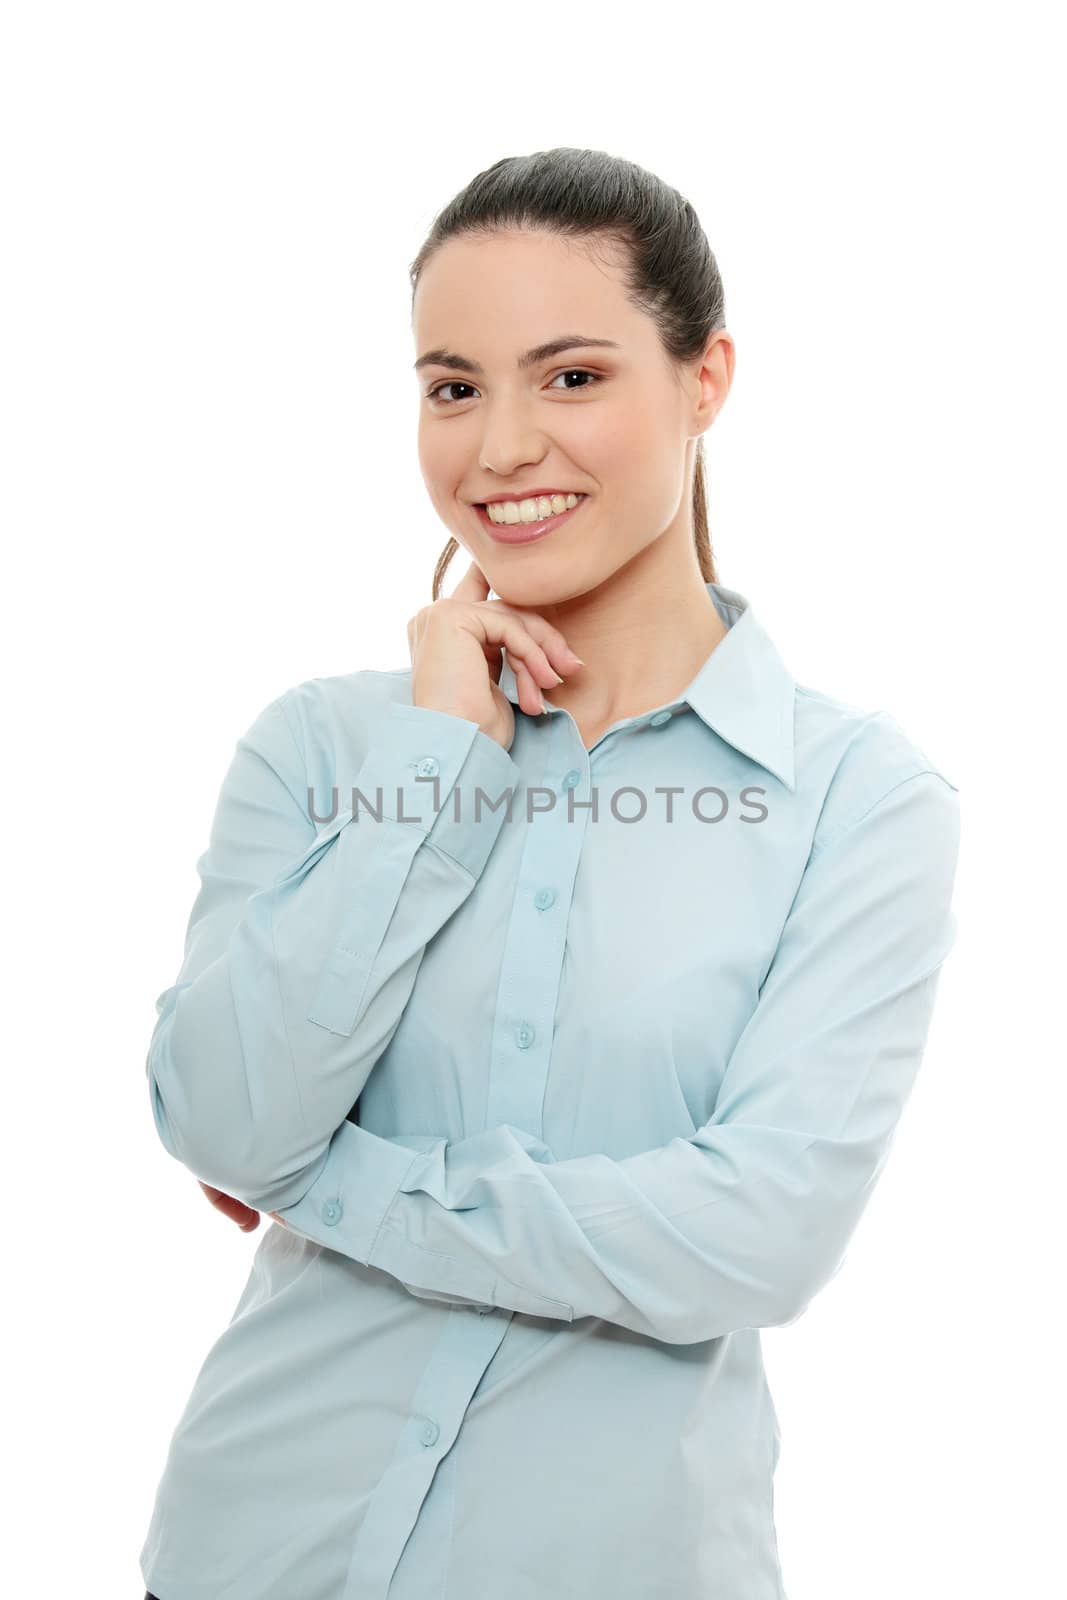 Young happy businesswoman, isolated on white